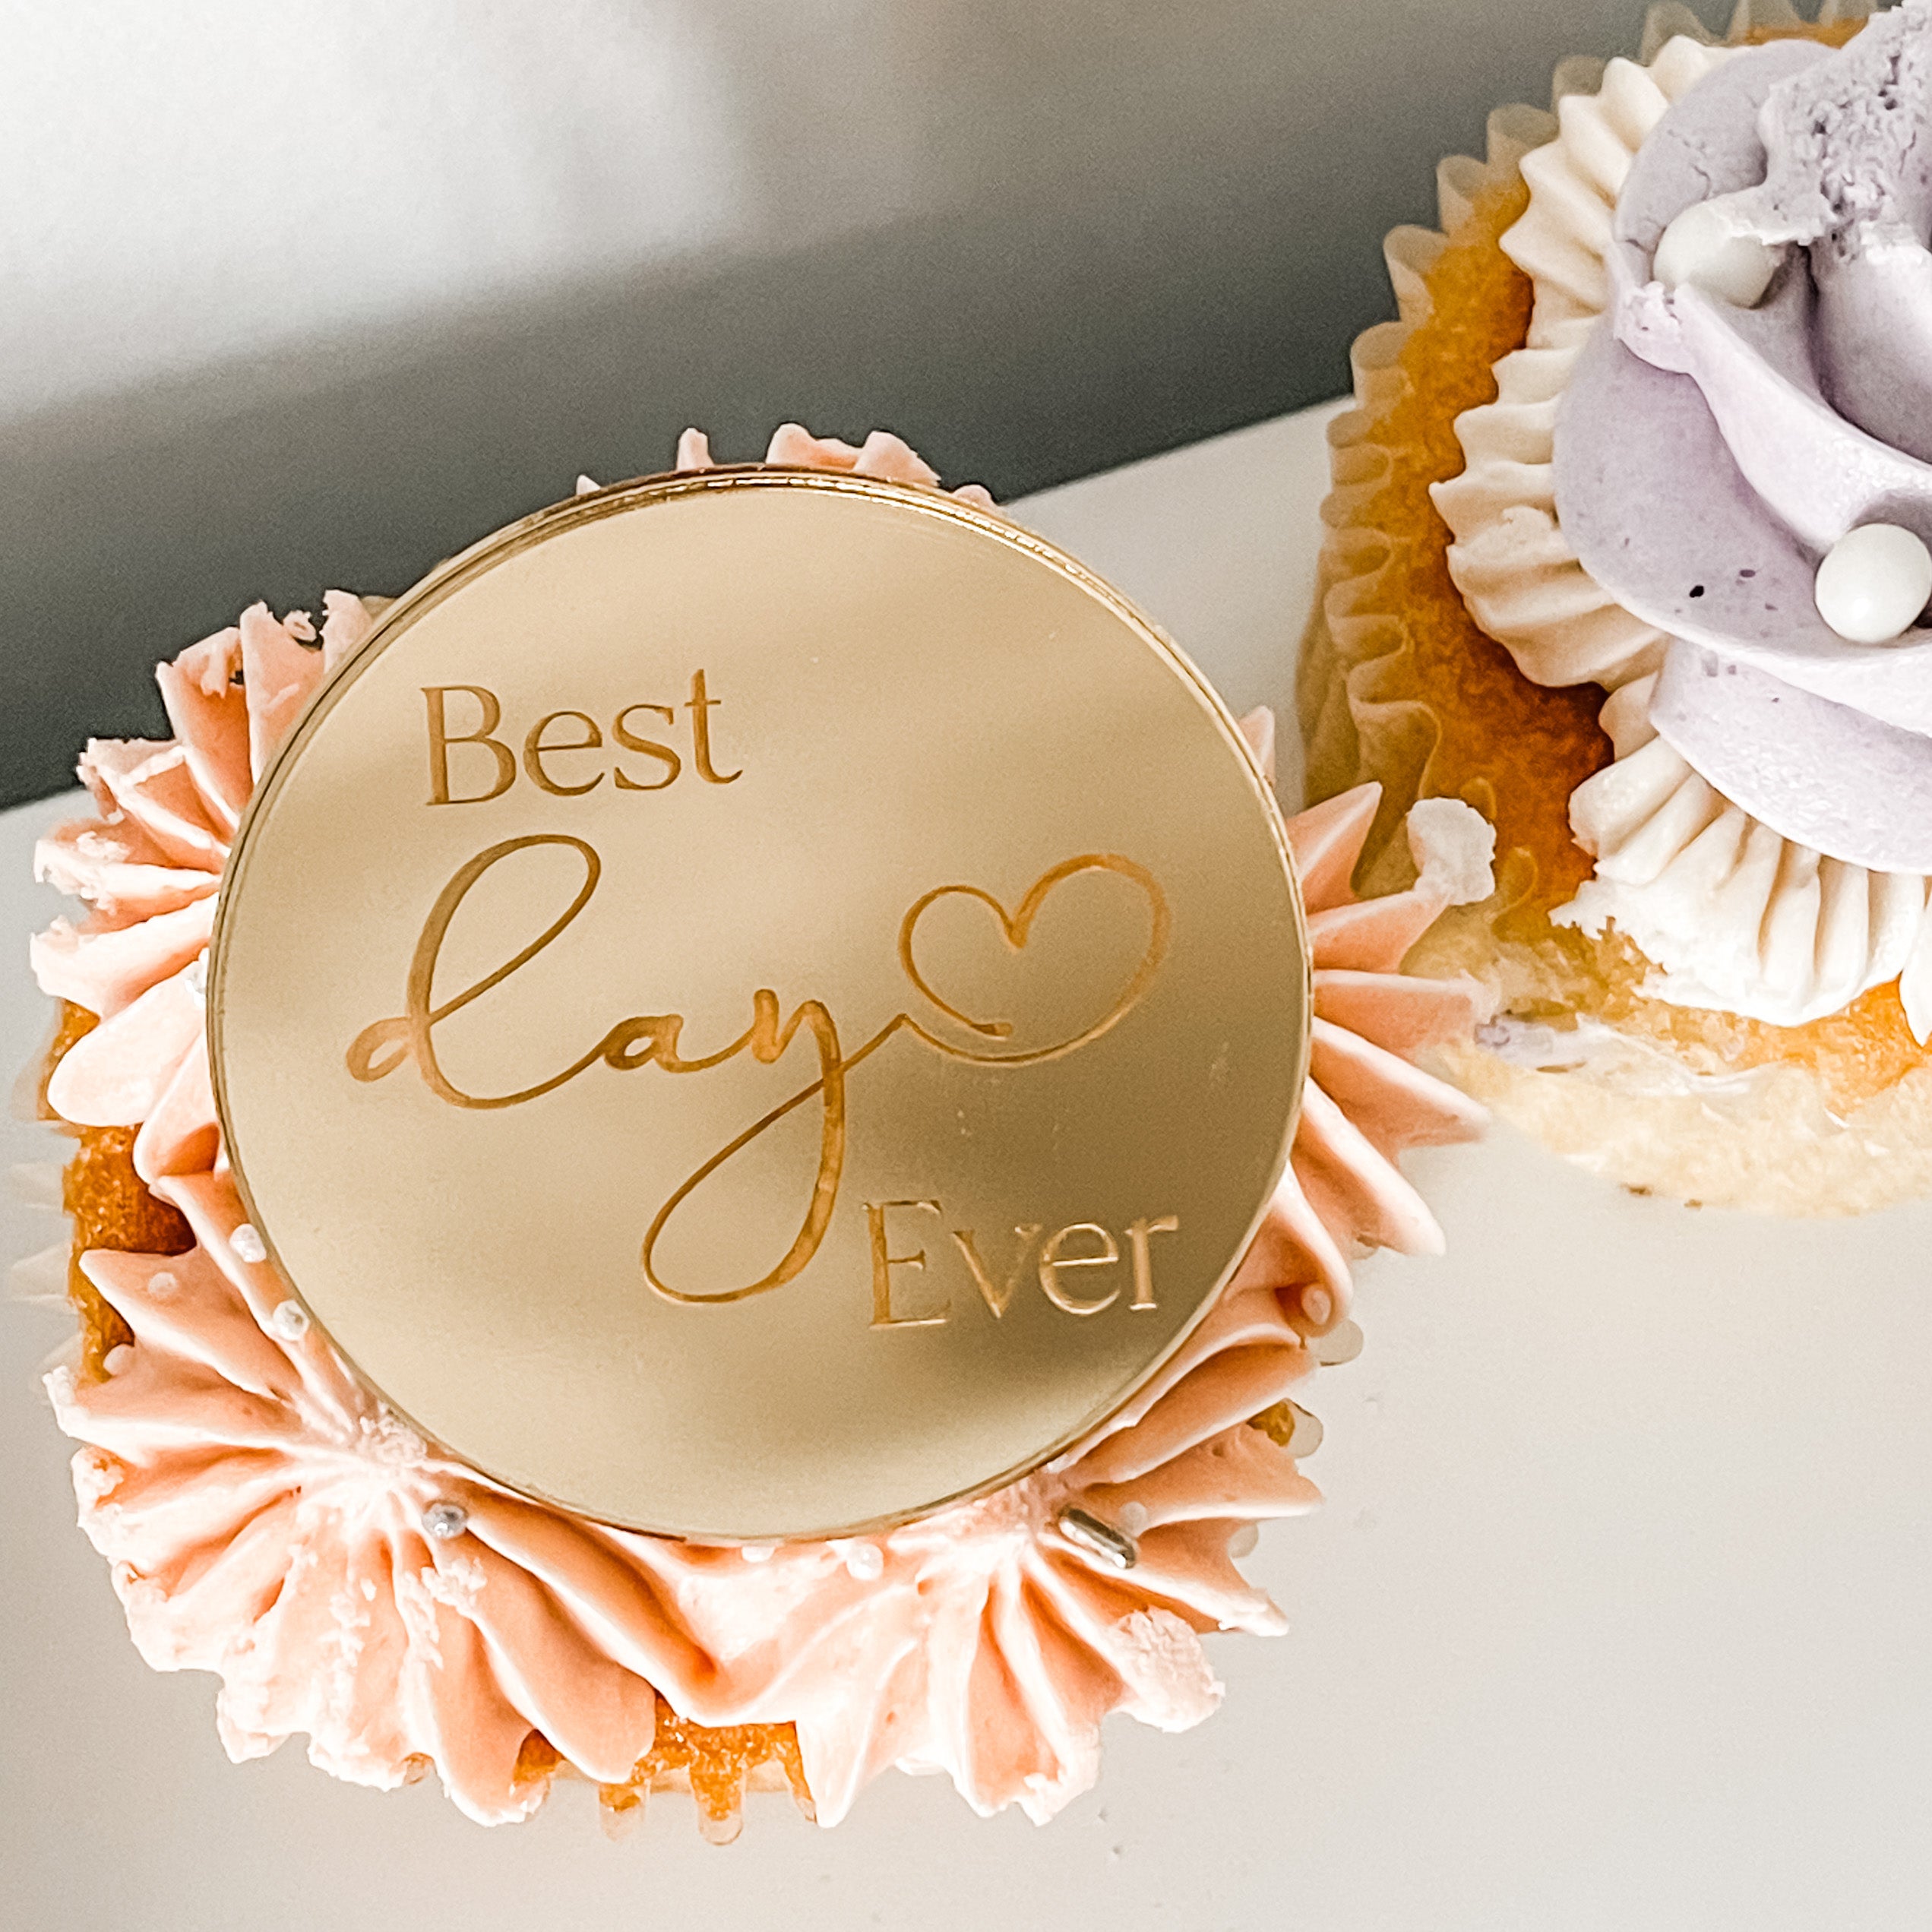 Best Day Ever Wedding Cake Charms